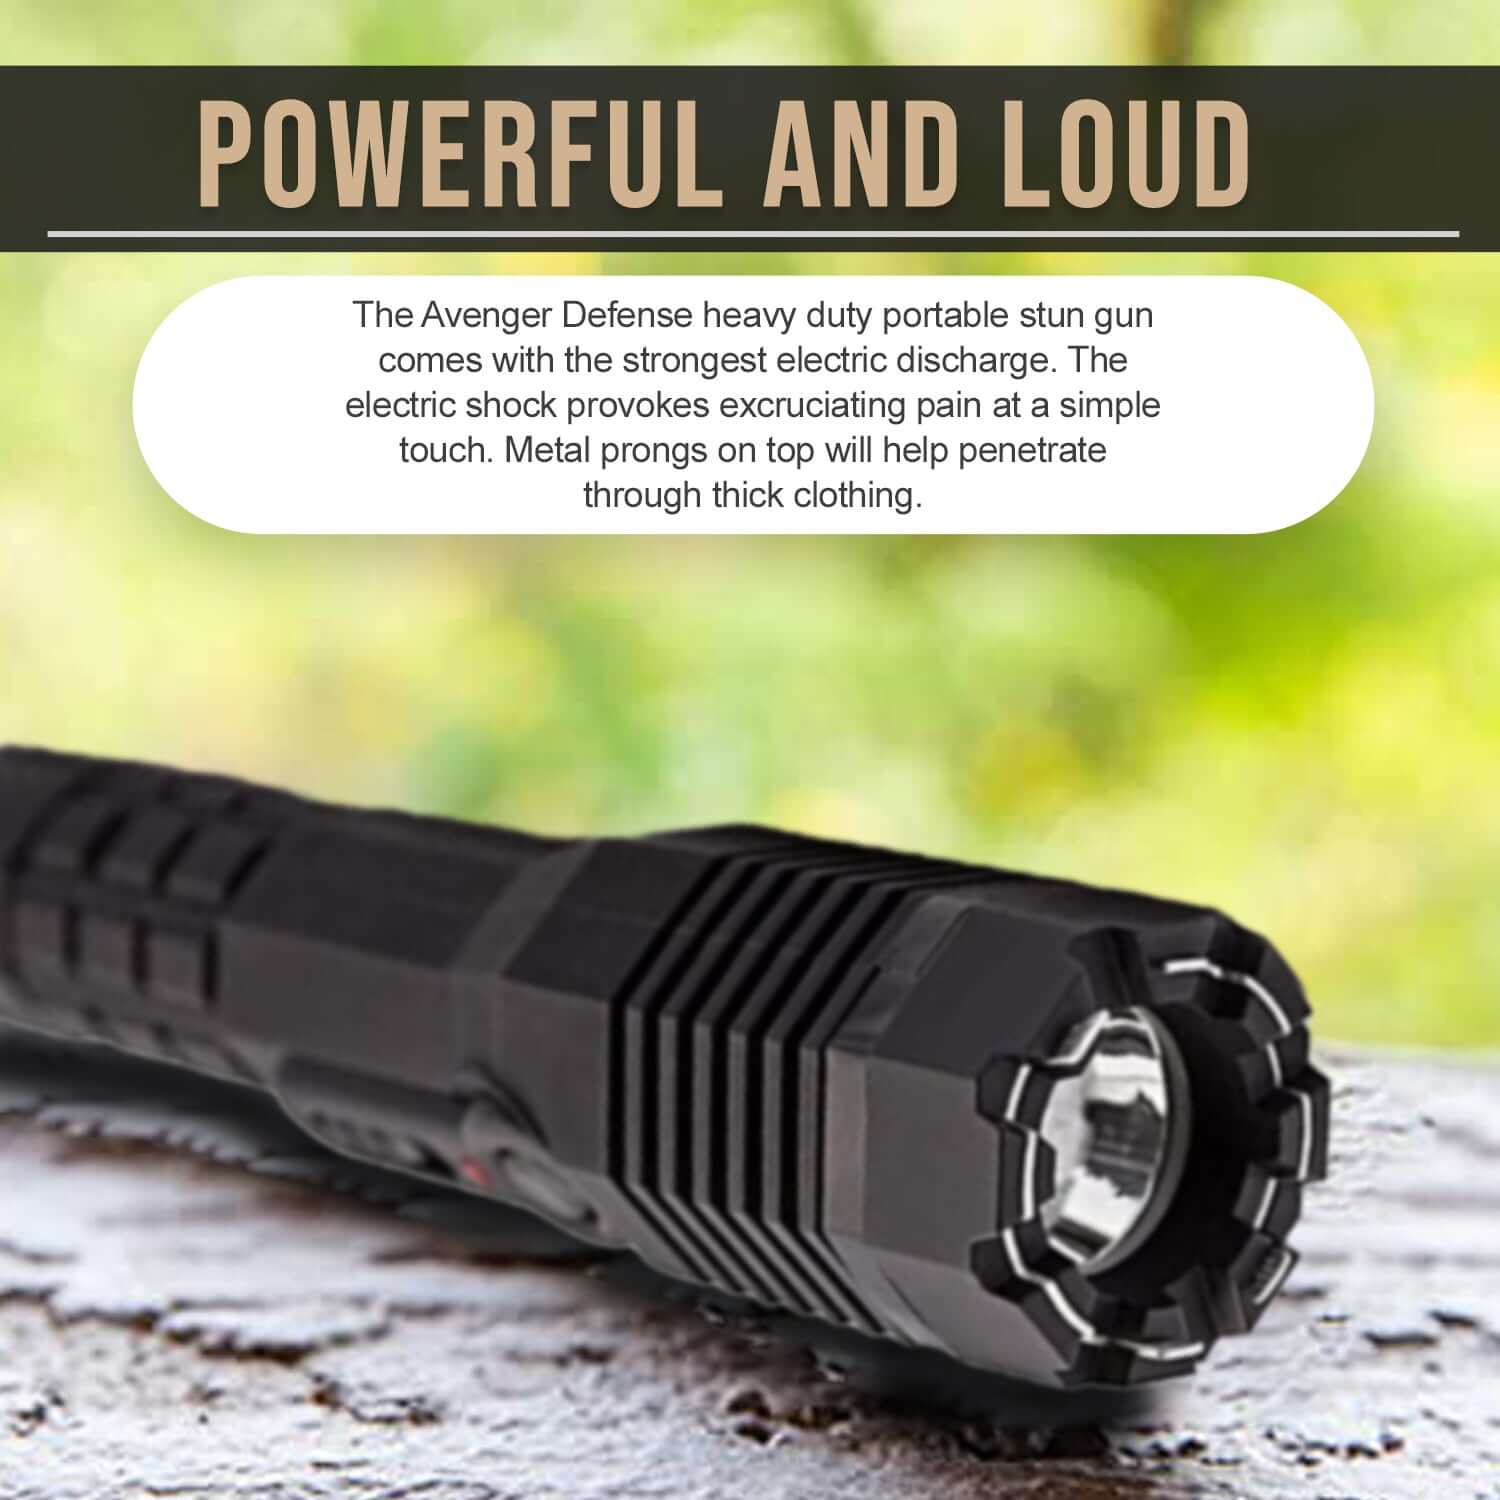 Heavy Duty Stun Gun - Tactical Flashlight Rechargeable with 280 Lumen LED . Extremely powerful 1.4uC - Black